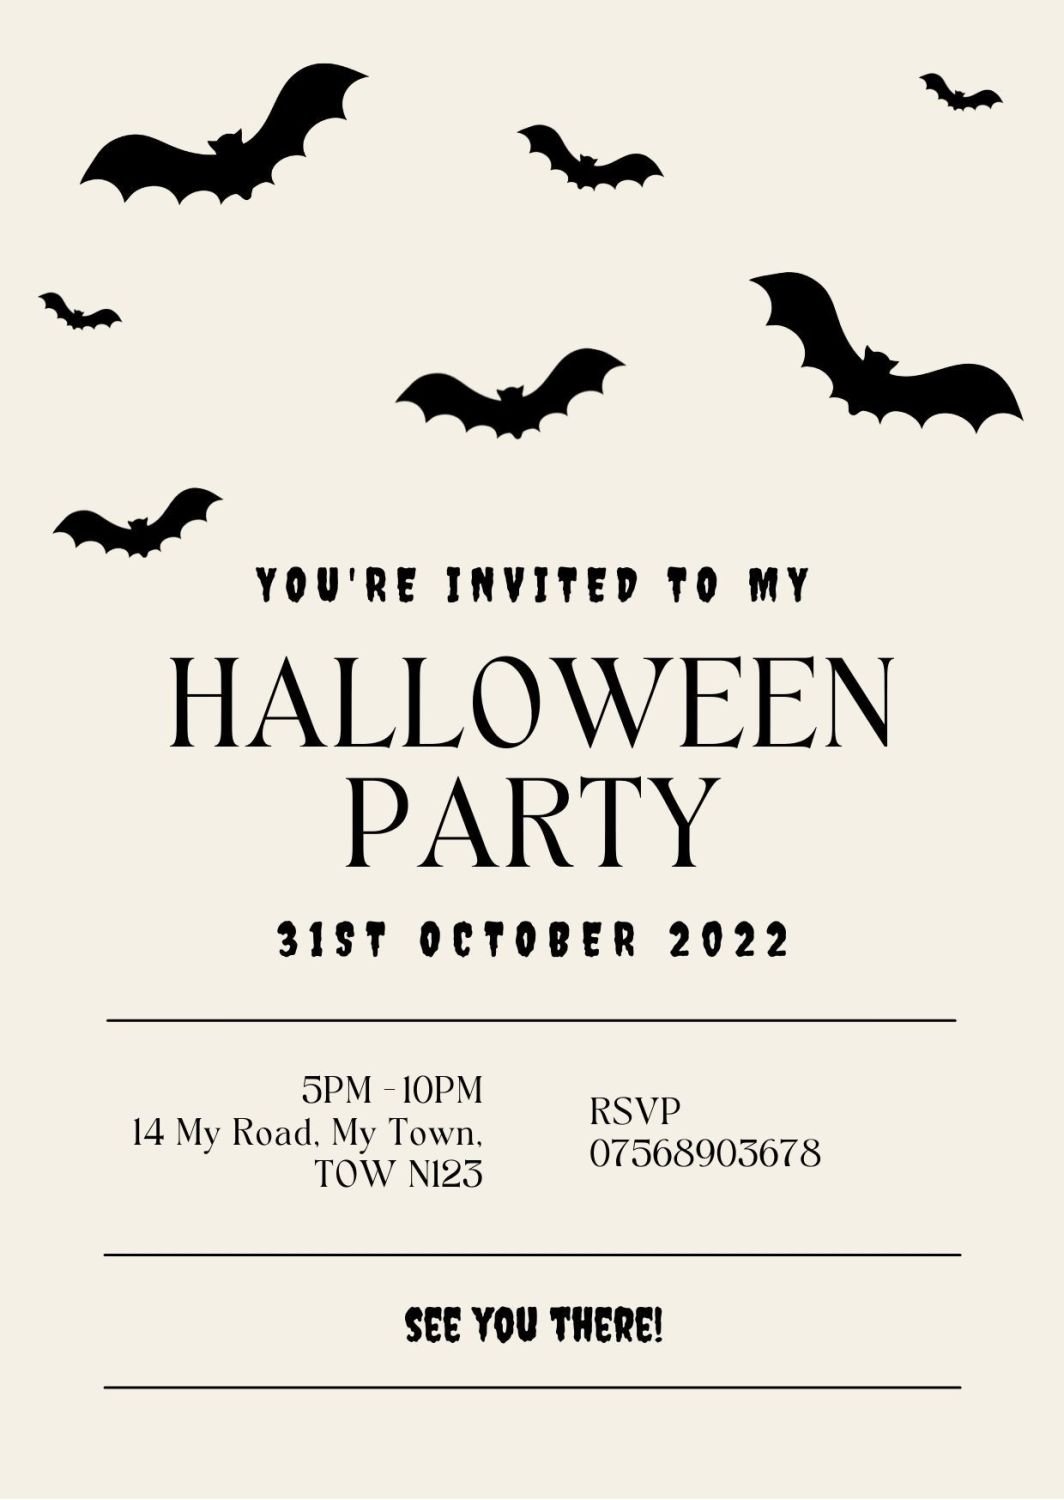 Personalised With Your Details - Halloween Party Invitation PDF Printable F